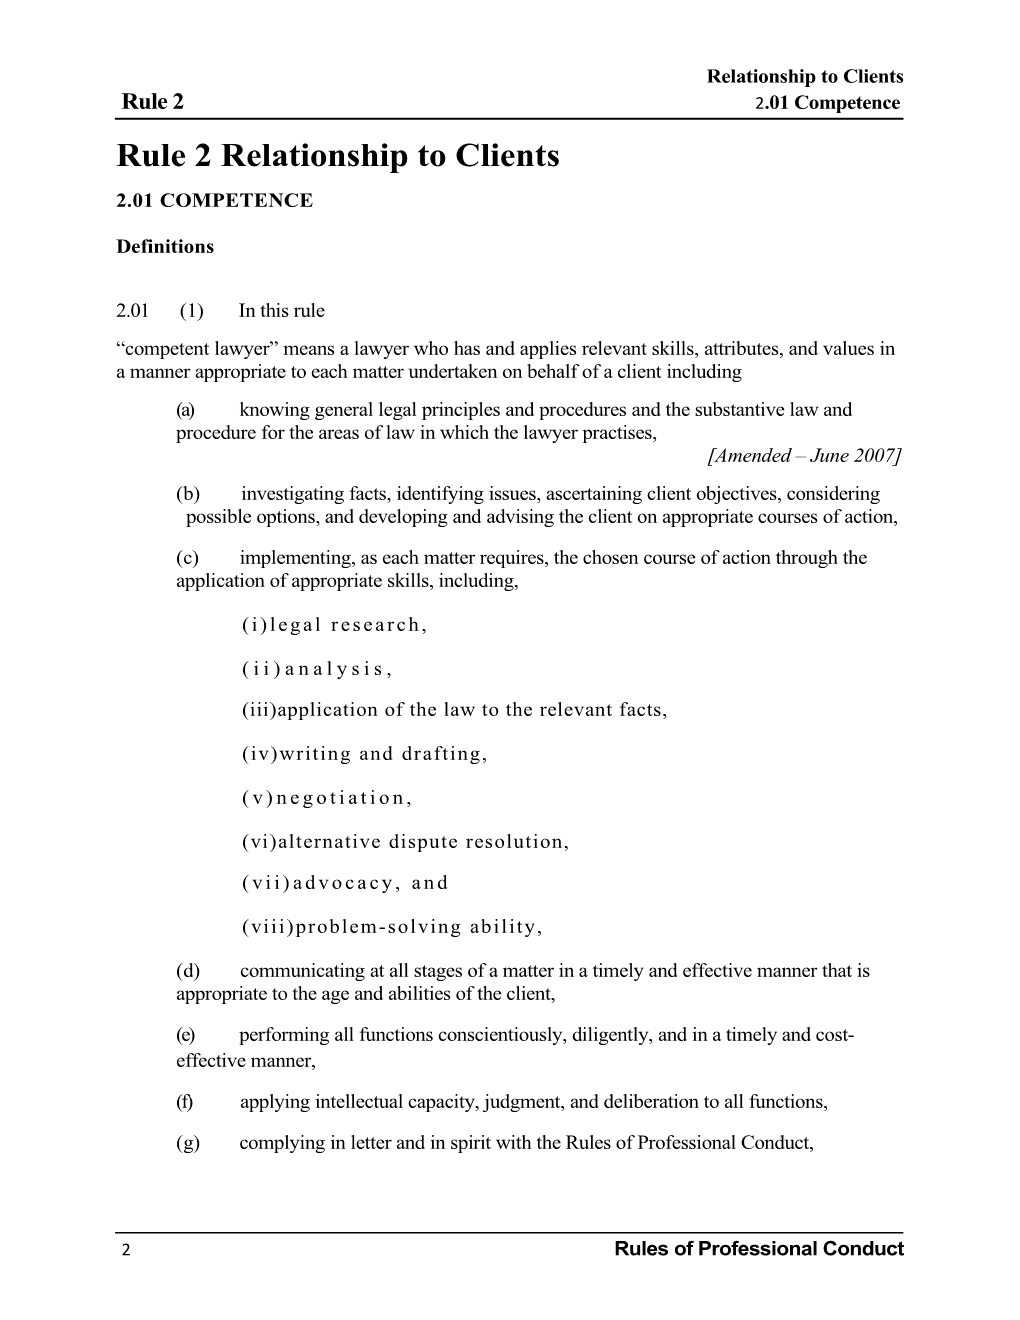 Rule 2 Relationship to Clients